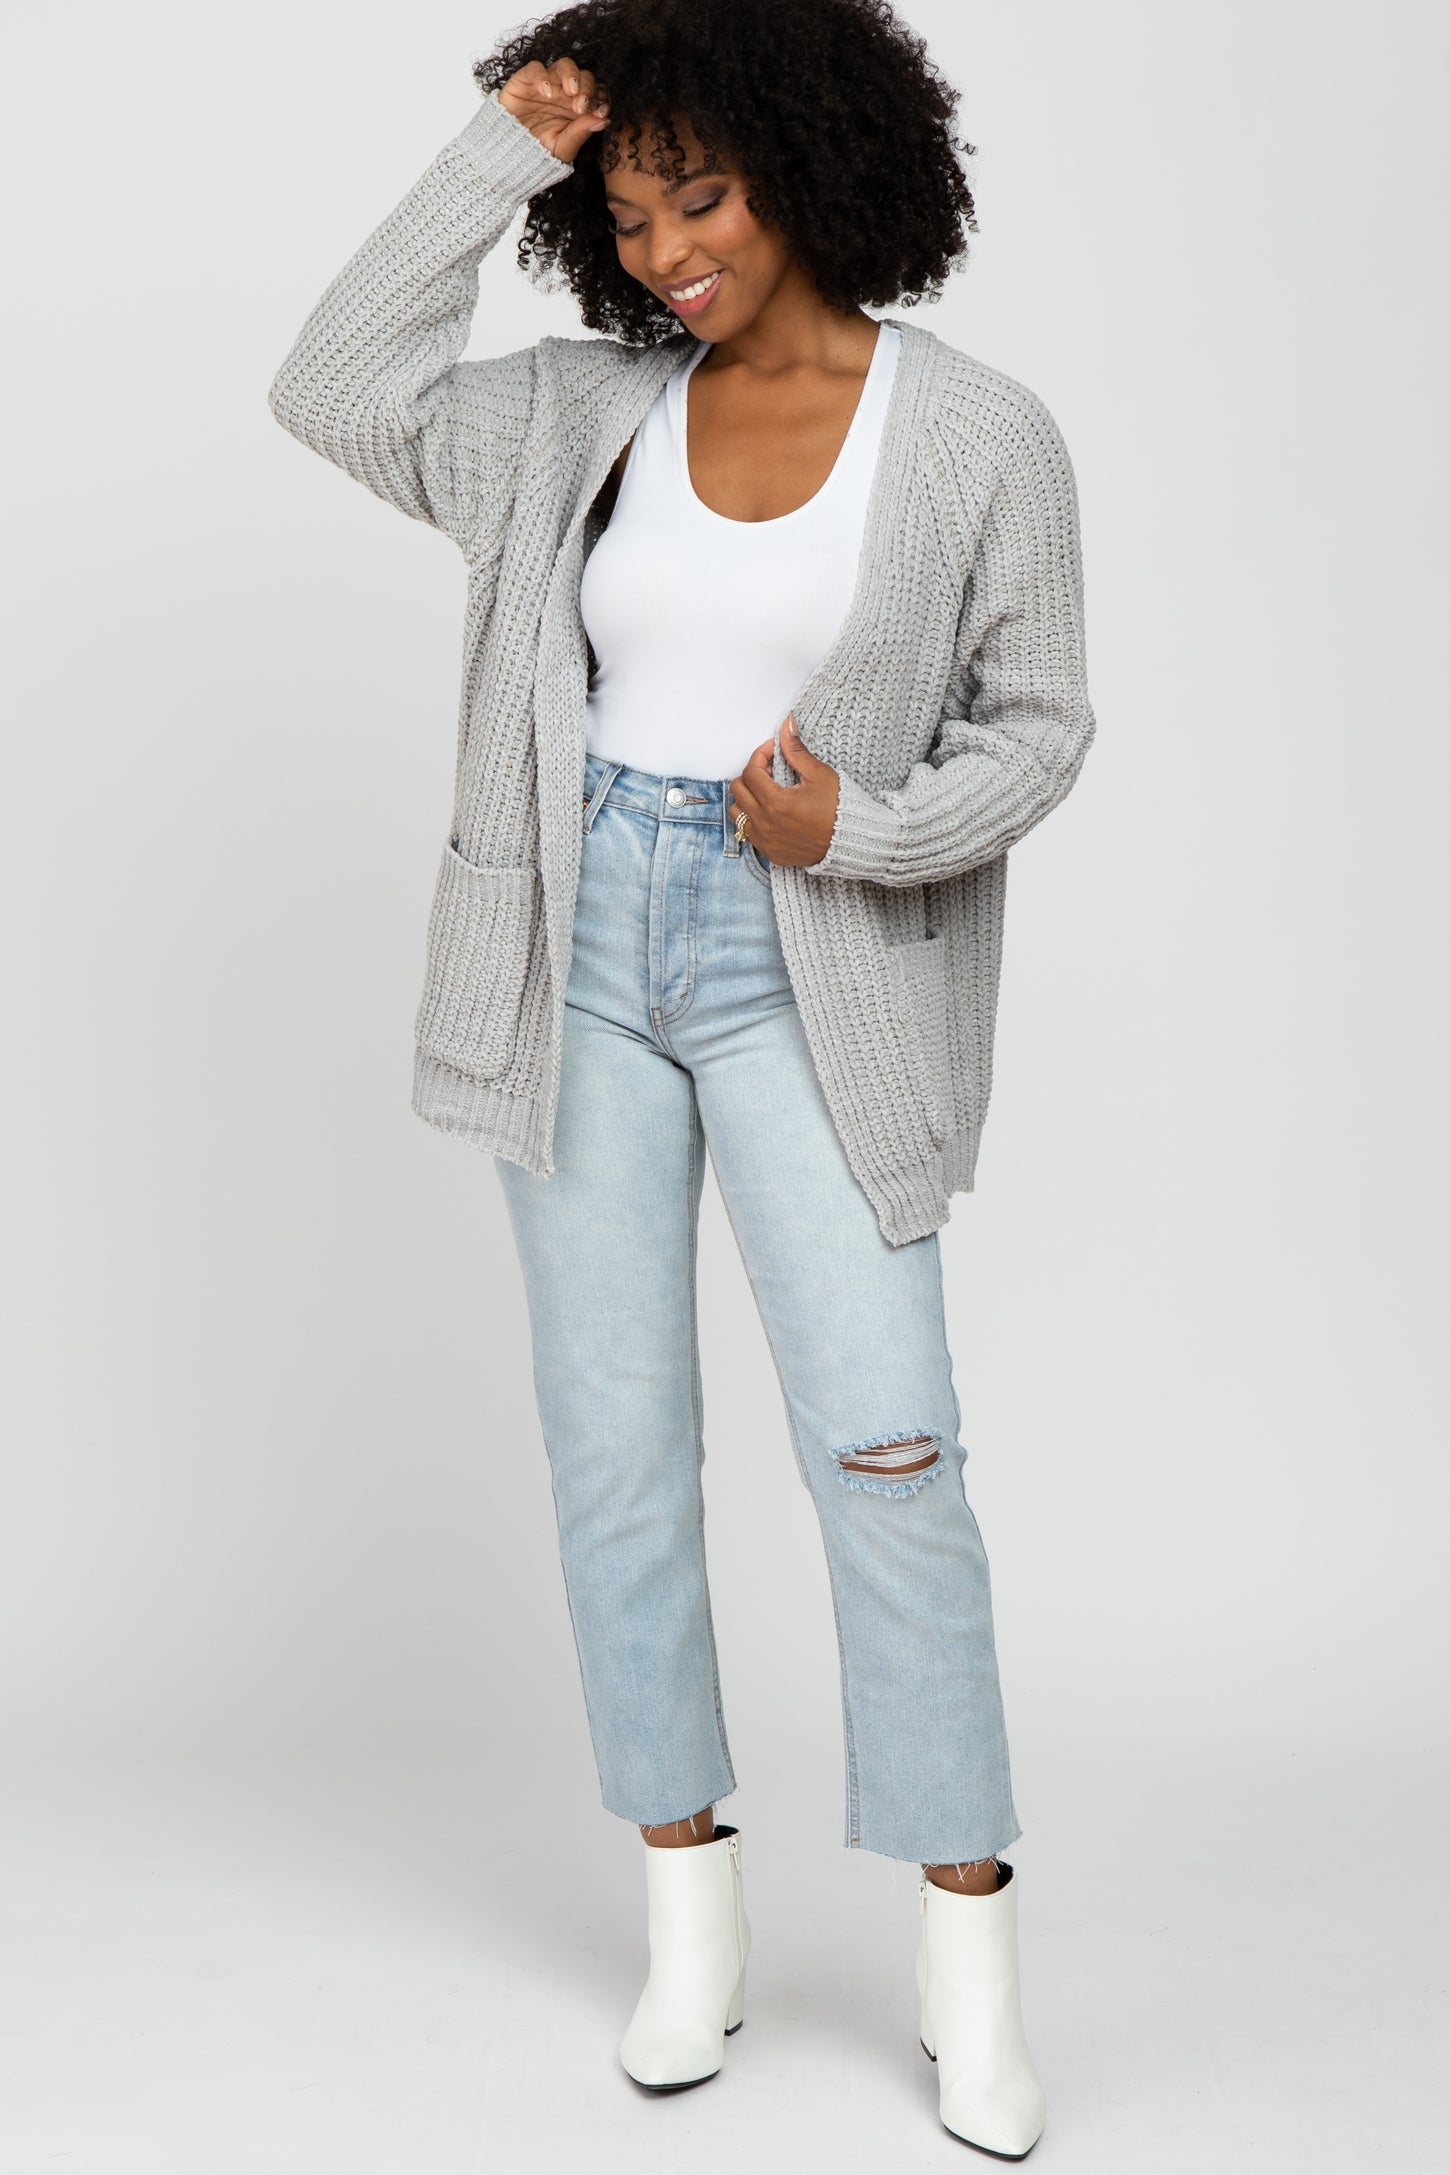 Grey Ribbed Cable Knit Cardigan